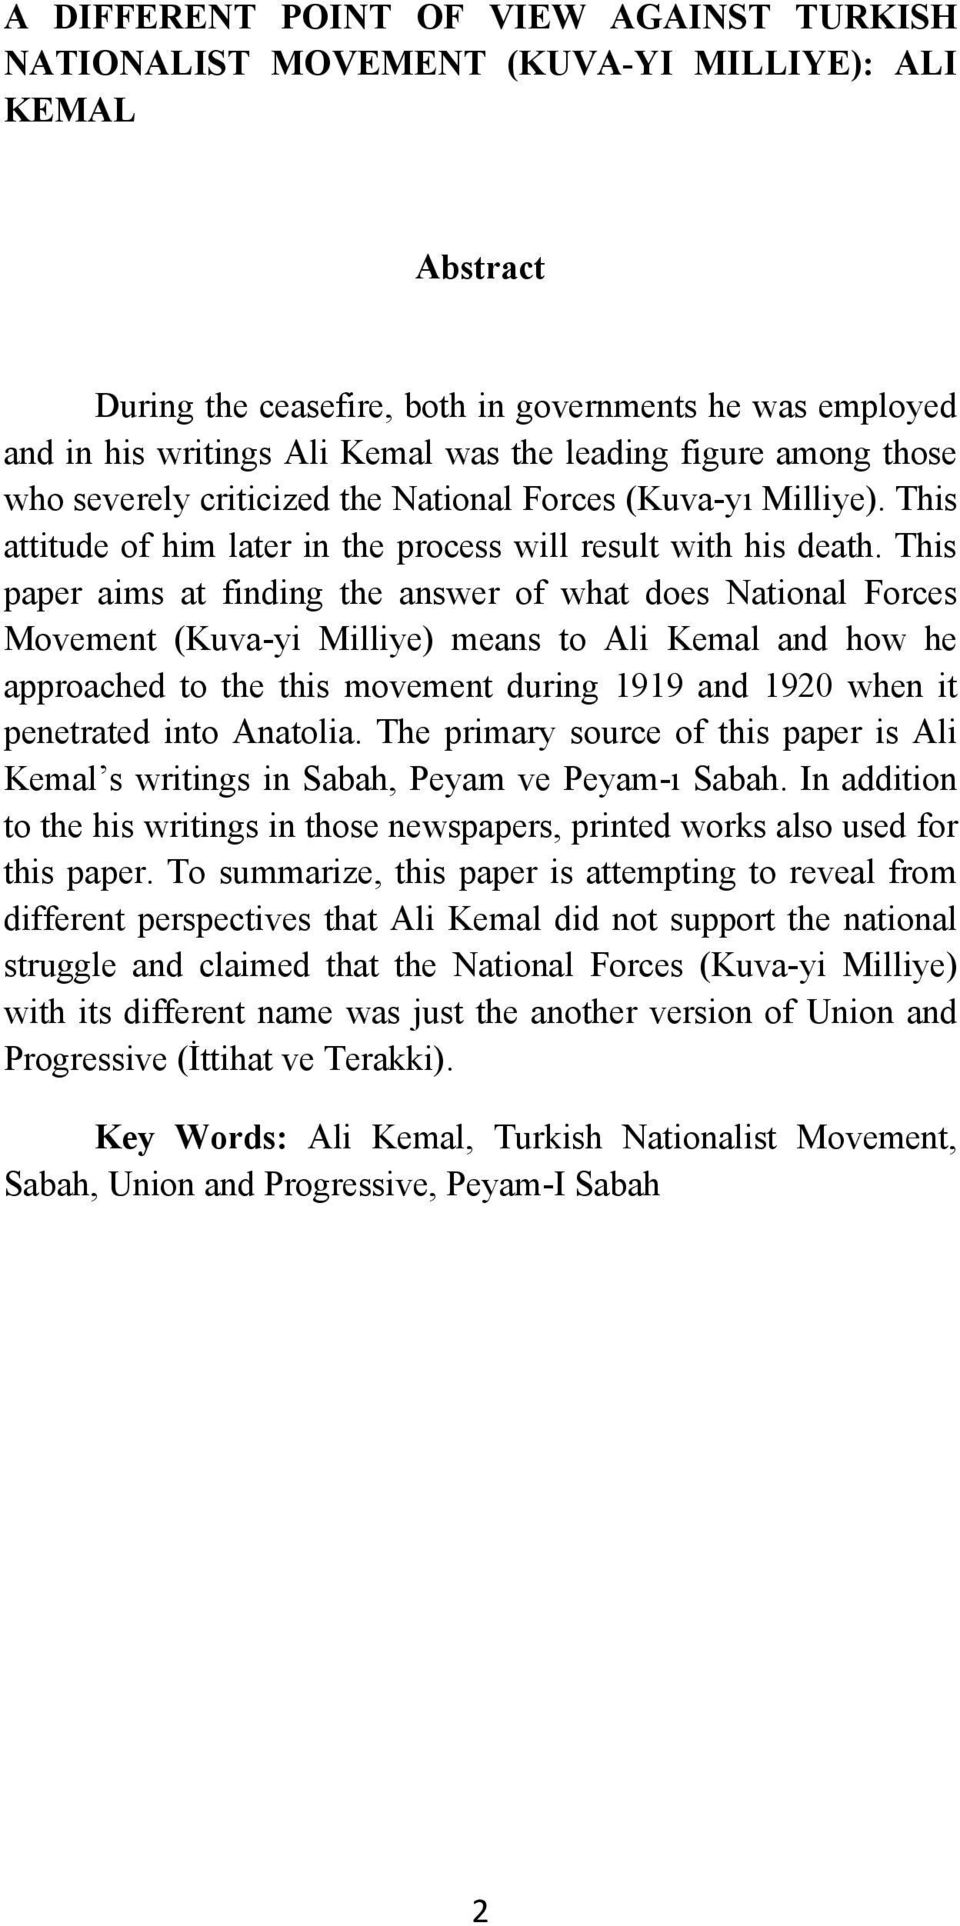 This paper aims at finding the answer of what does National Forces Movement (Kuva-yi Milliye) means to Ali Kemal and how he approached to the this movement during 1919 and 1920 when it penetrated